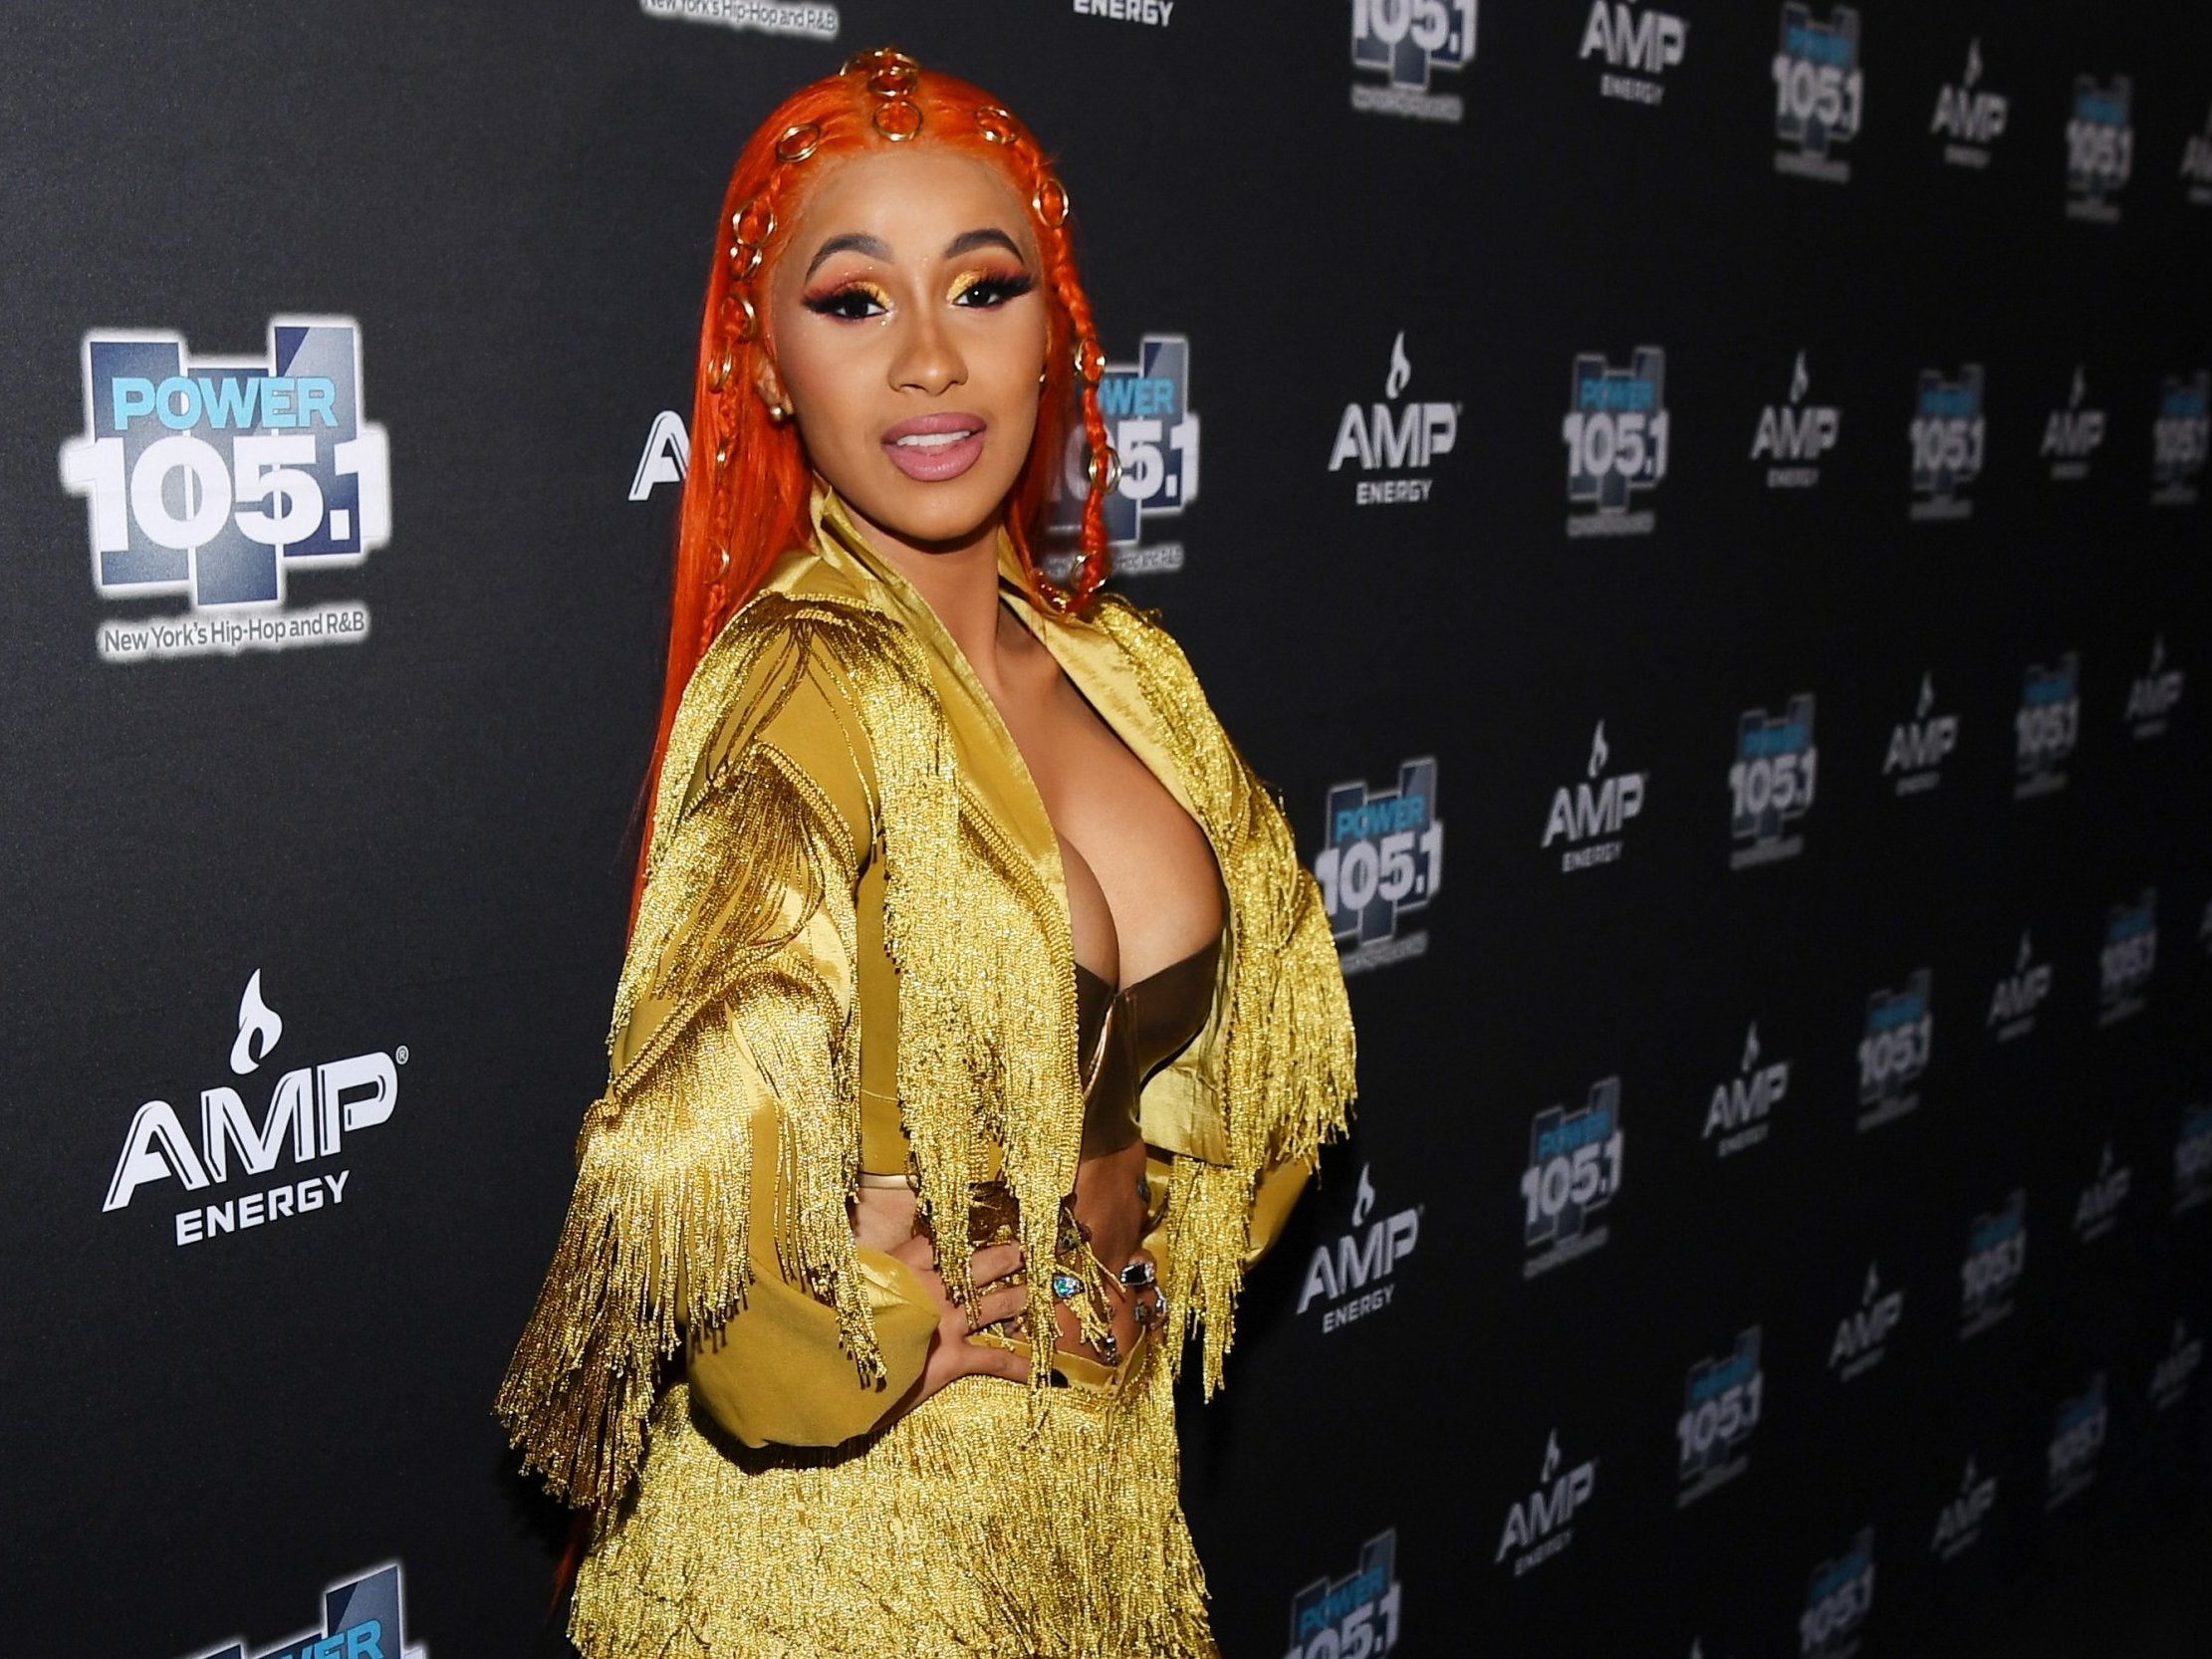 Cardi B Feels 'Super Confident' Because of Her Plastic Surgery